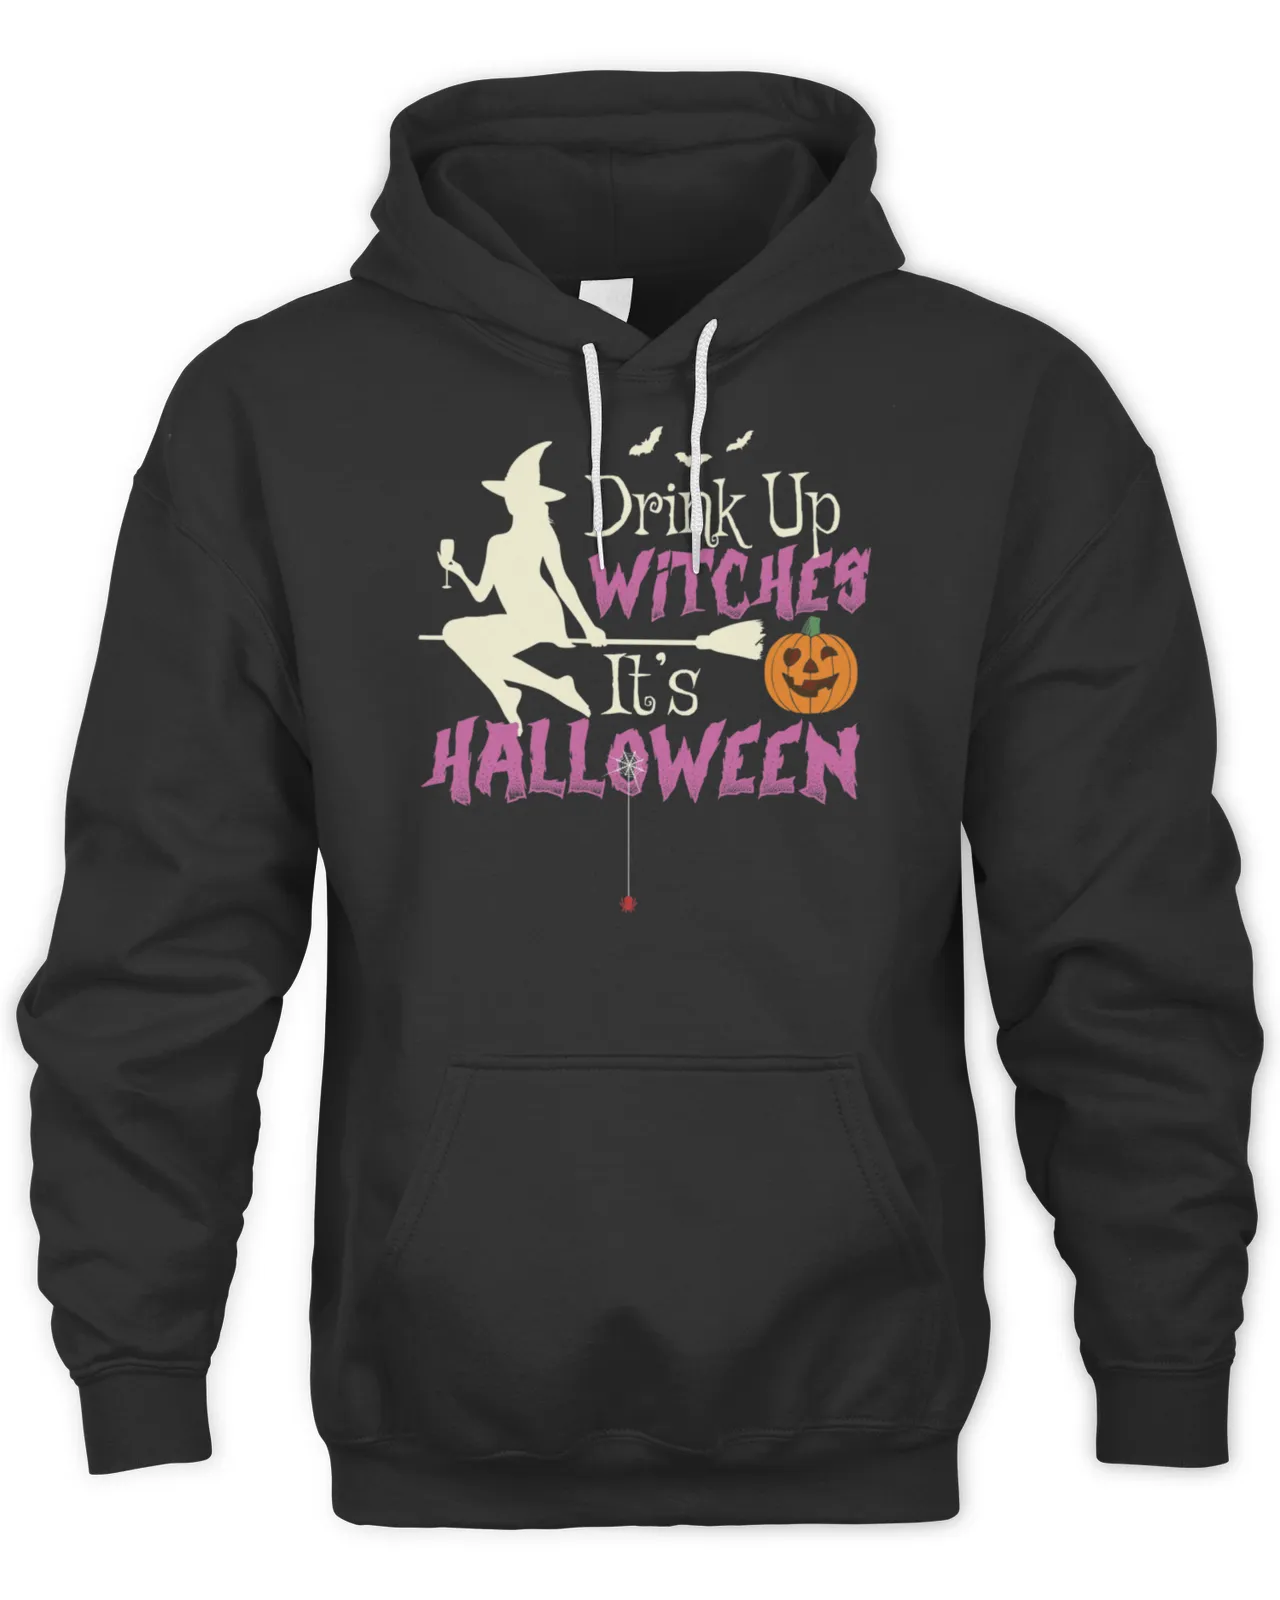 M171 Witch Please Shirt,Halloween Shirt,Pumpkin Shirt,Funny Halloween T-Shirt,Halloween Witch,Halloween Party,Halloween Costume,Gift For Her